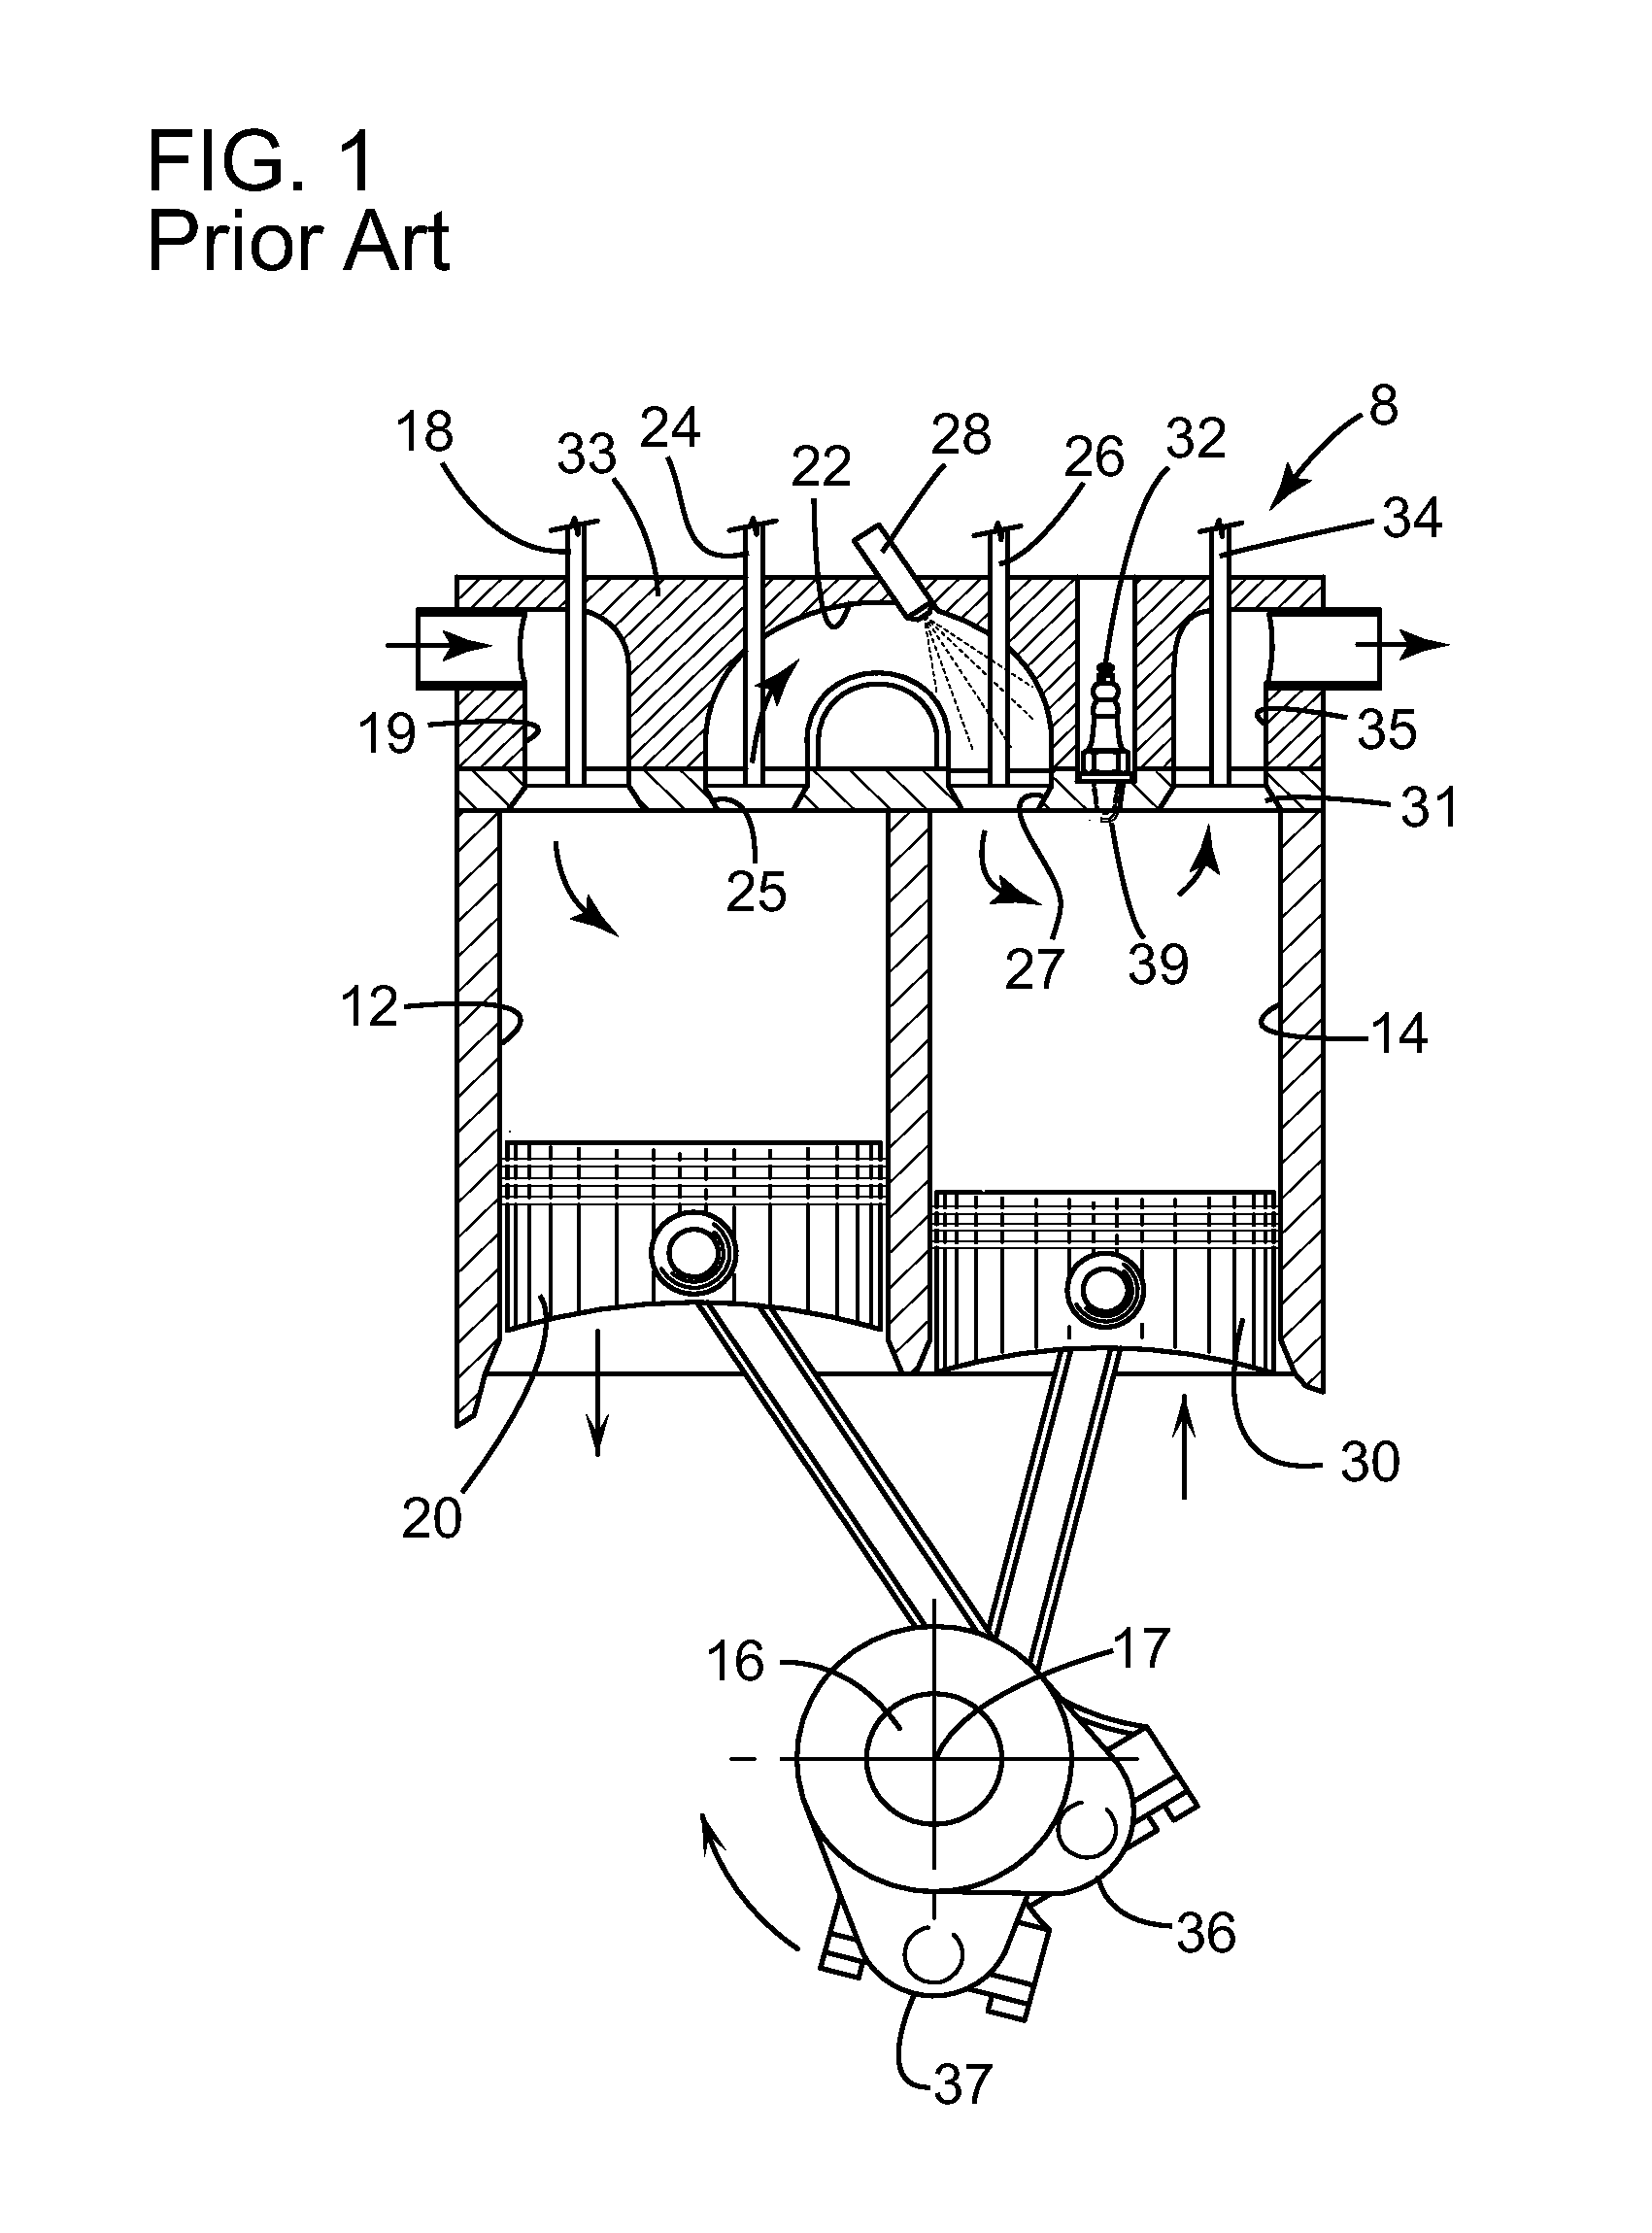 Split-cycle engine with dual spray targeting fuel injection